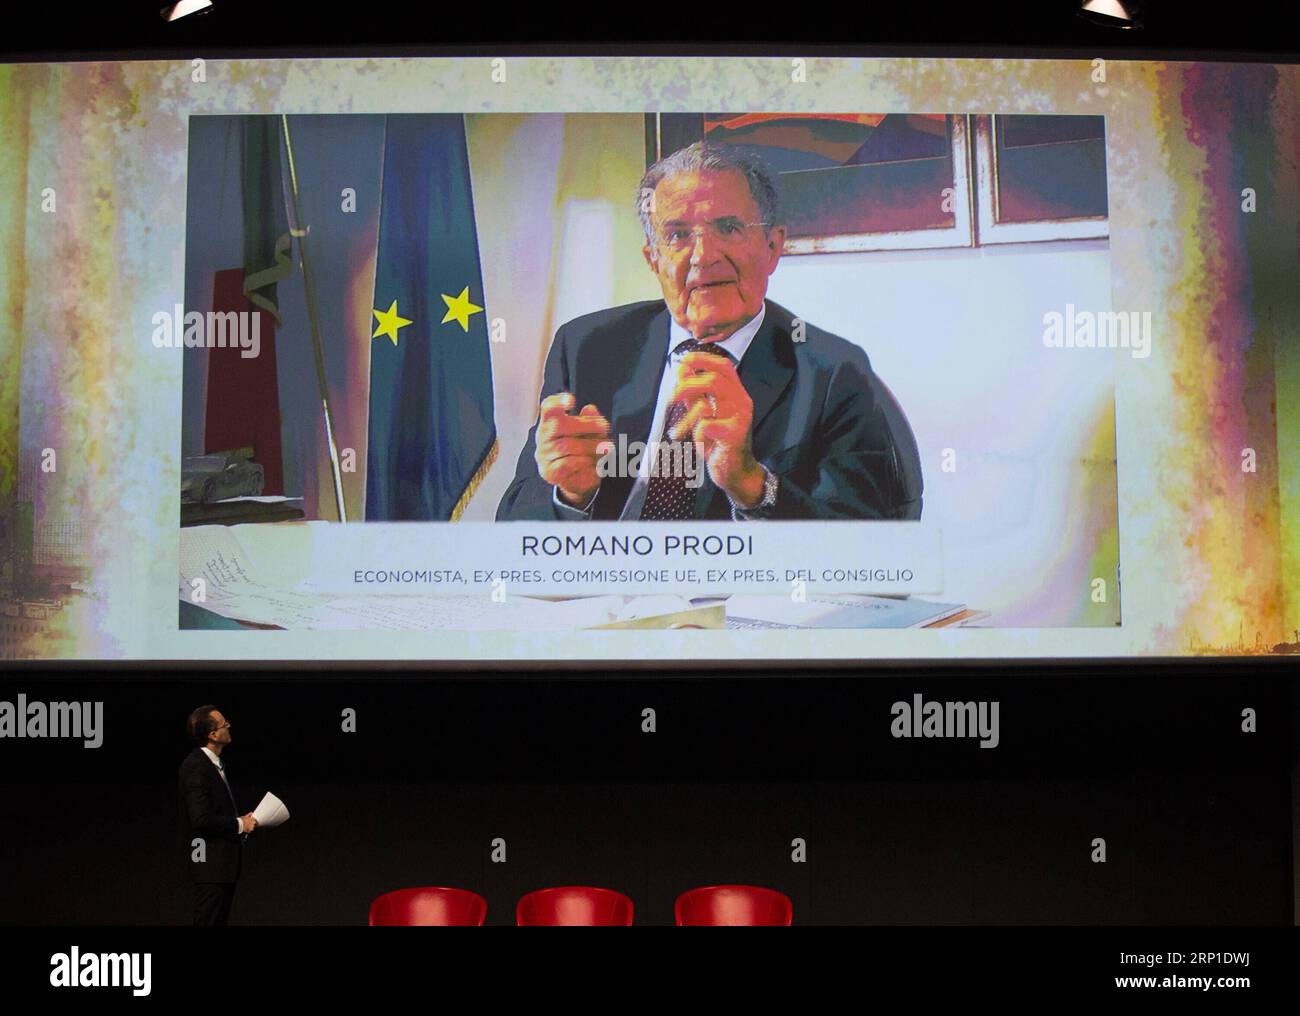 (180629) -- MILAN, June 29, 2018 -- Former center-left Prime Minister Romano Prodi, a leading economist who also served as president of the European Commission, delivers a speech at a conference in Milan, Italy, June 28, 2018. Italian and Chinese entrepreneurs, experts and officials Thursday gathered at the Milan stock exchange for a conference to discuss ways to seize opportunities from the China-proposed Belt and Road Initiative (BRI). ) (ly) ITALY-MILAN-BUSINESS-BELT AND ROAD COOPERATION JinxYu PUBLICATIONxNOTxINxCHN Stock Photo